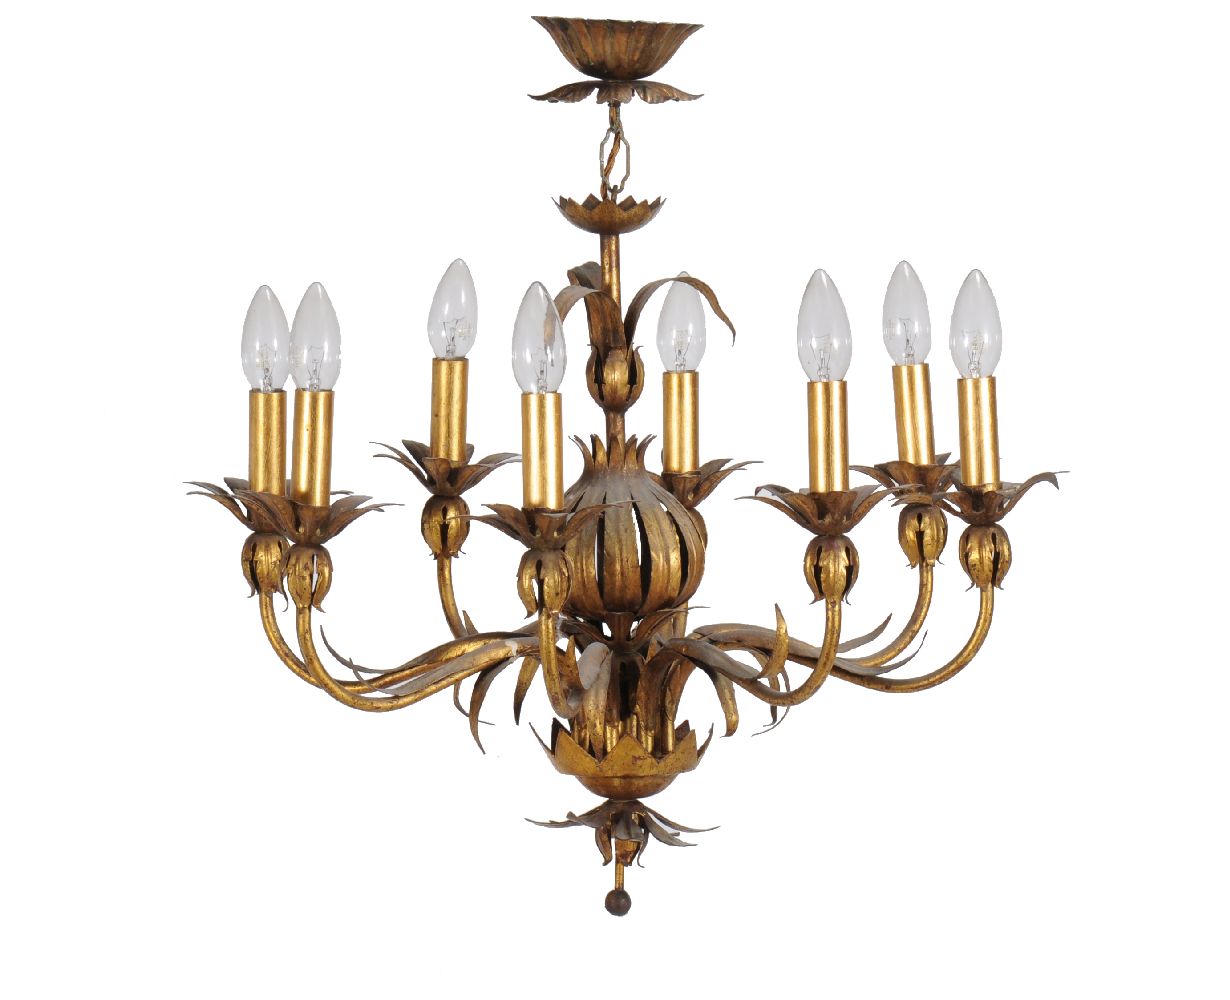 An Italian gilt metal six light chandelier in the form of a pineapple - Image 2 of 3